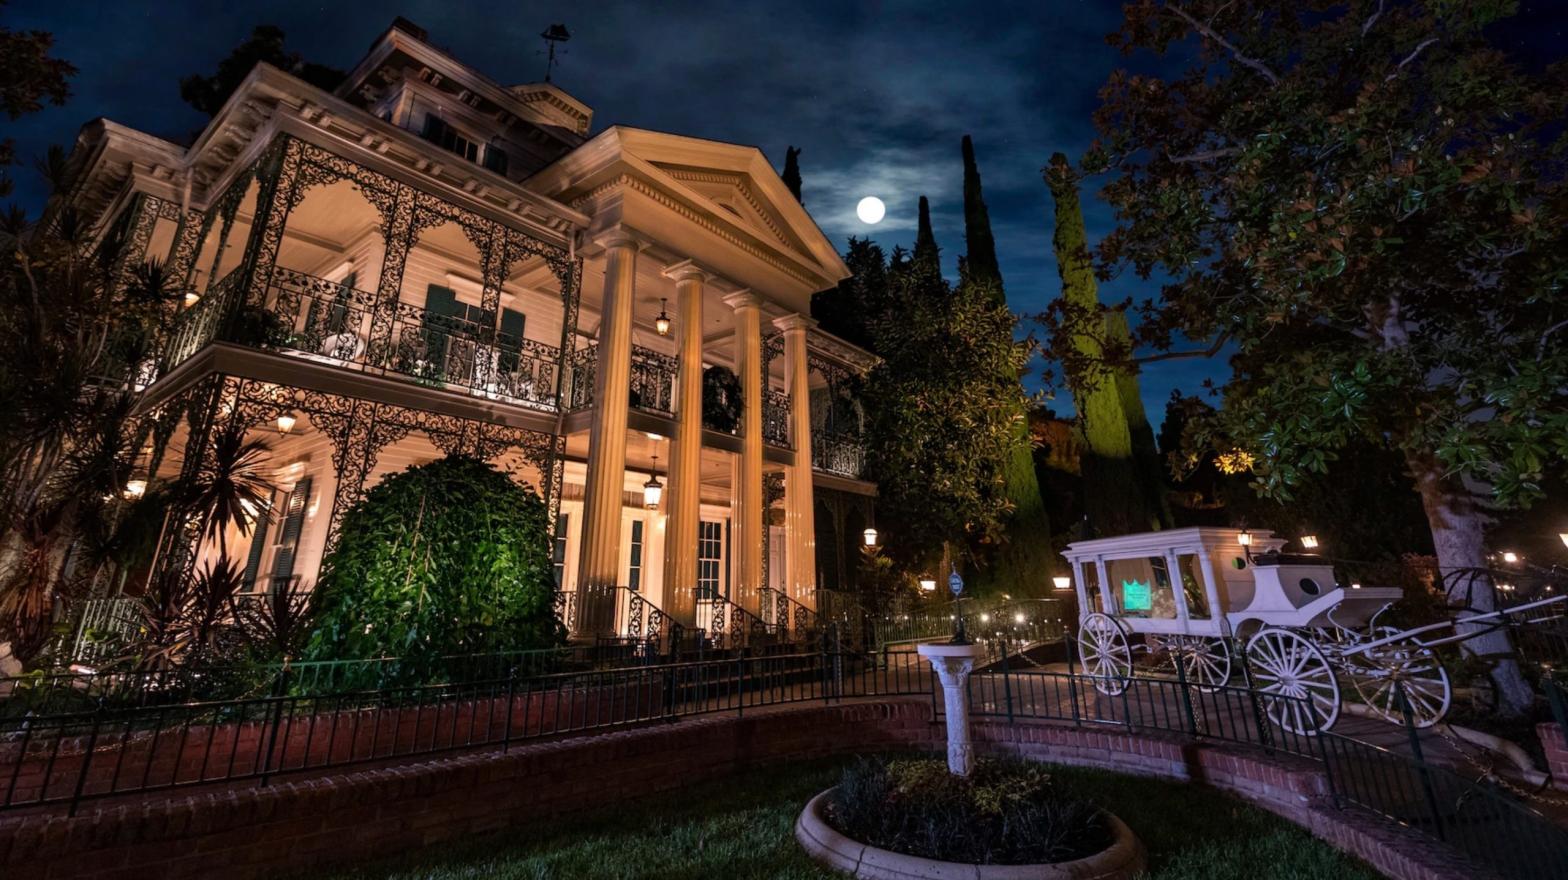 The Haunted Mansion may make its return to the big screen. (Photo: Disney Parks)